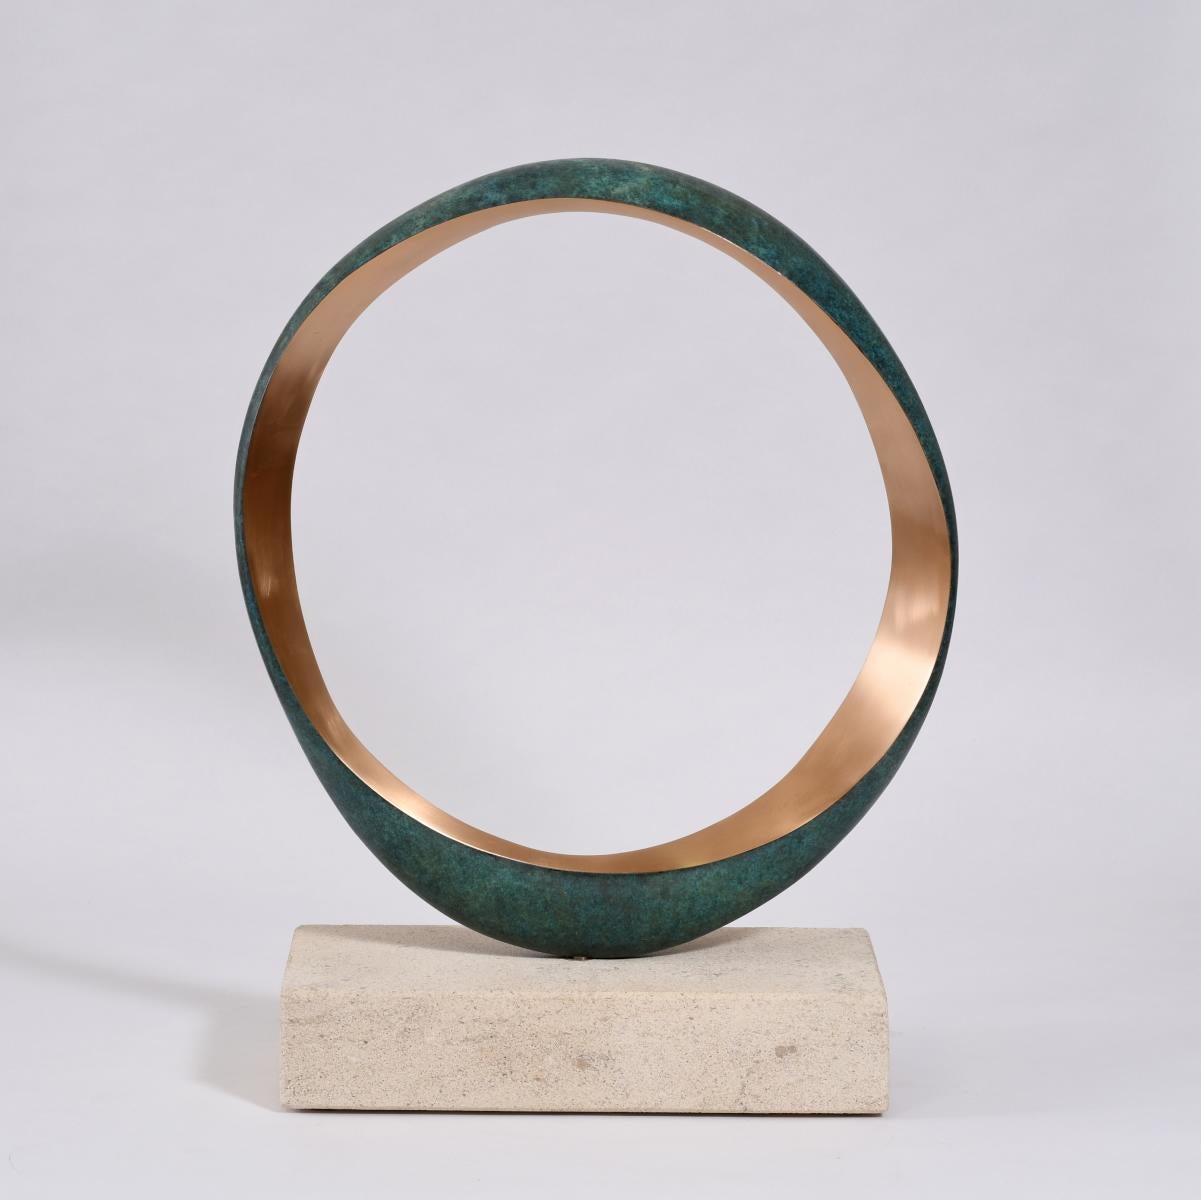 Bronze rotating on a Bath stone base.
Stamped with monogram signature and uniquely numbered 543, 1/9
Series of 9 variations.
The inner edges show natural bronze.  Finished to a smooth satin on one face the other has a spattered translucent